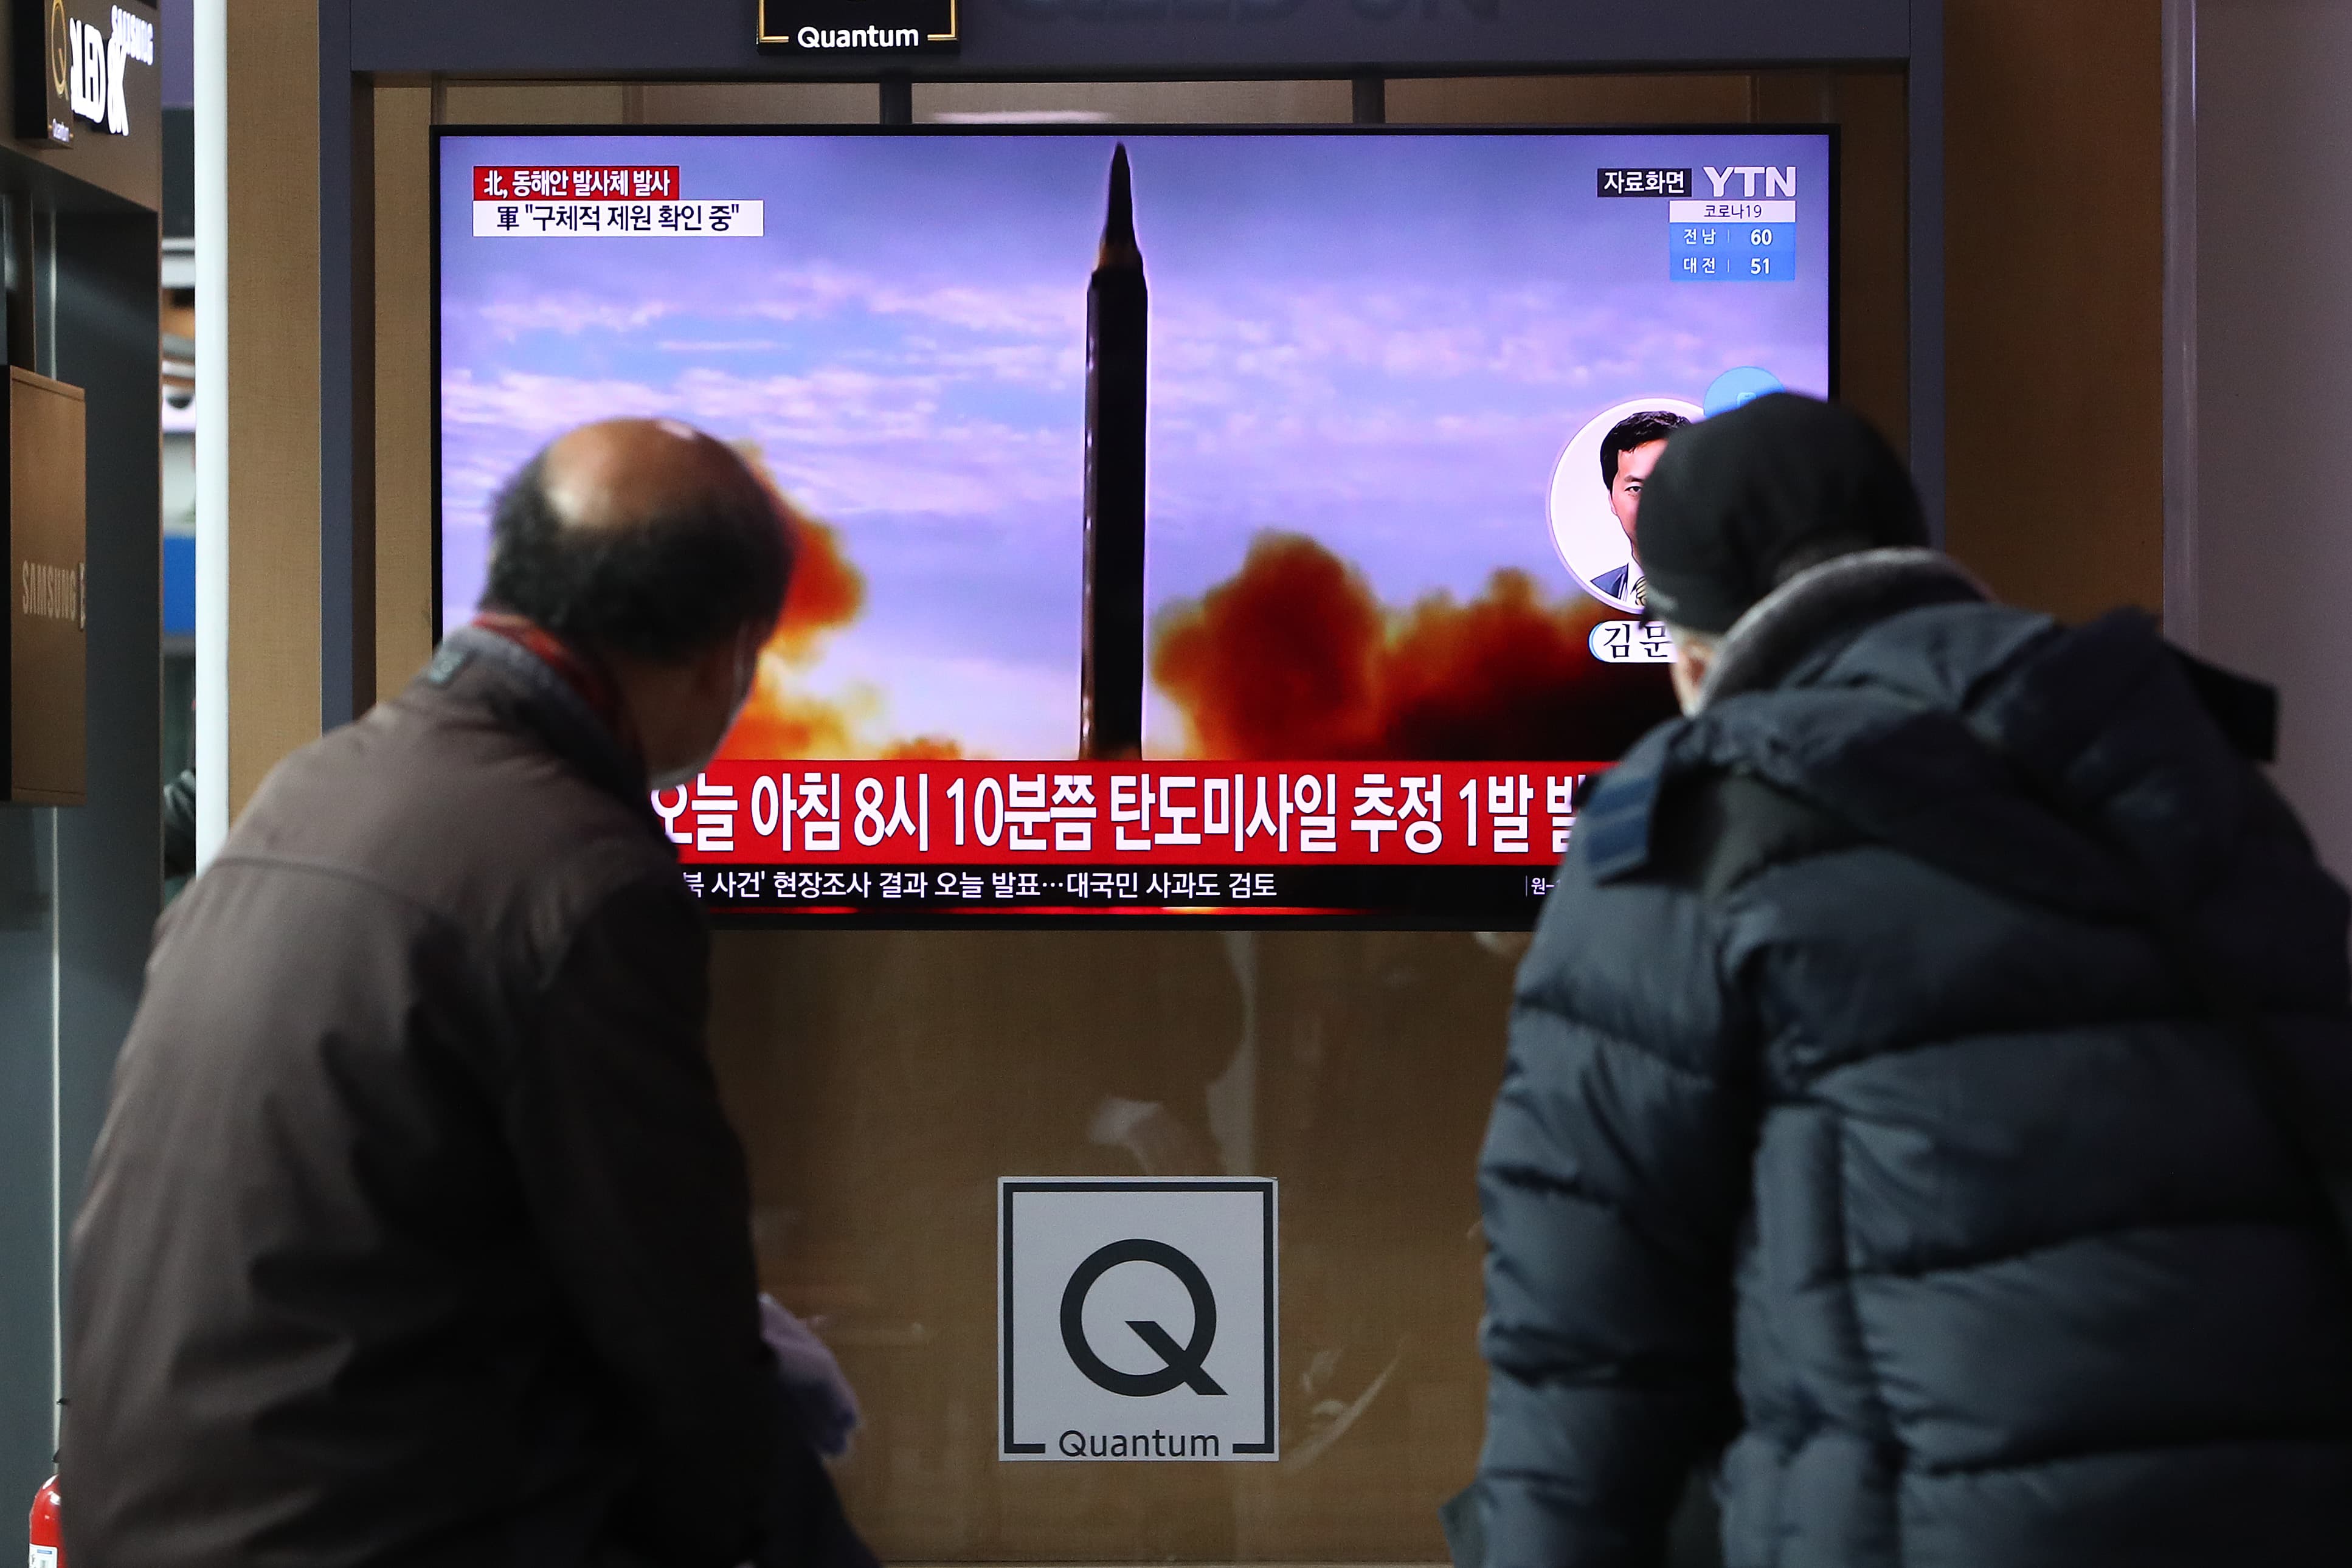 NKorea Claims Solid-fuel Hypersonic Missile Test